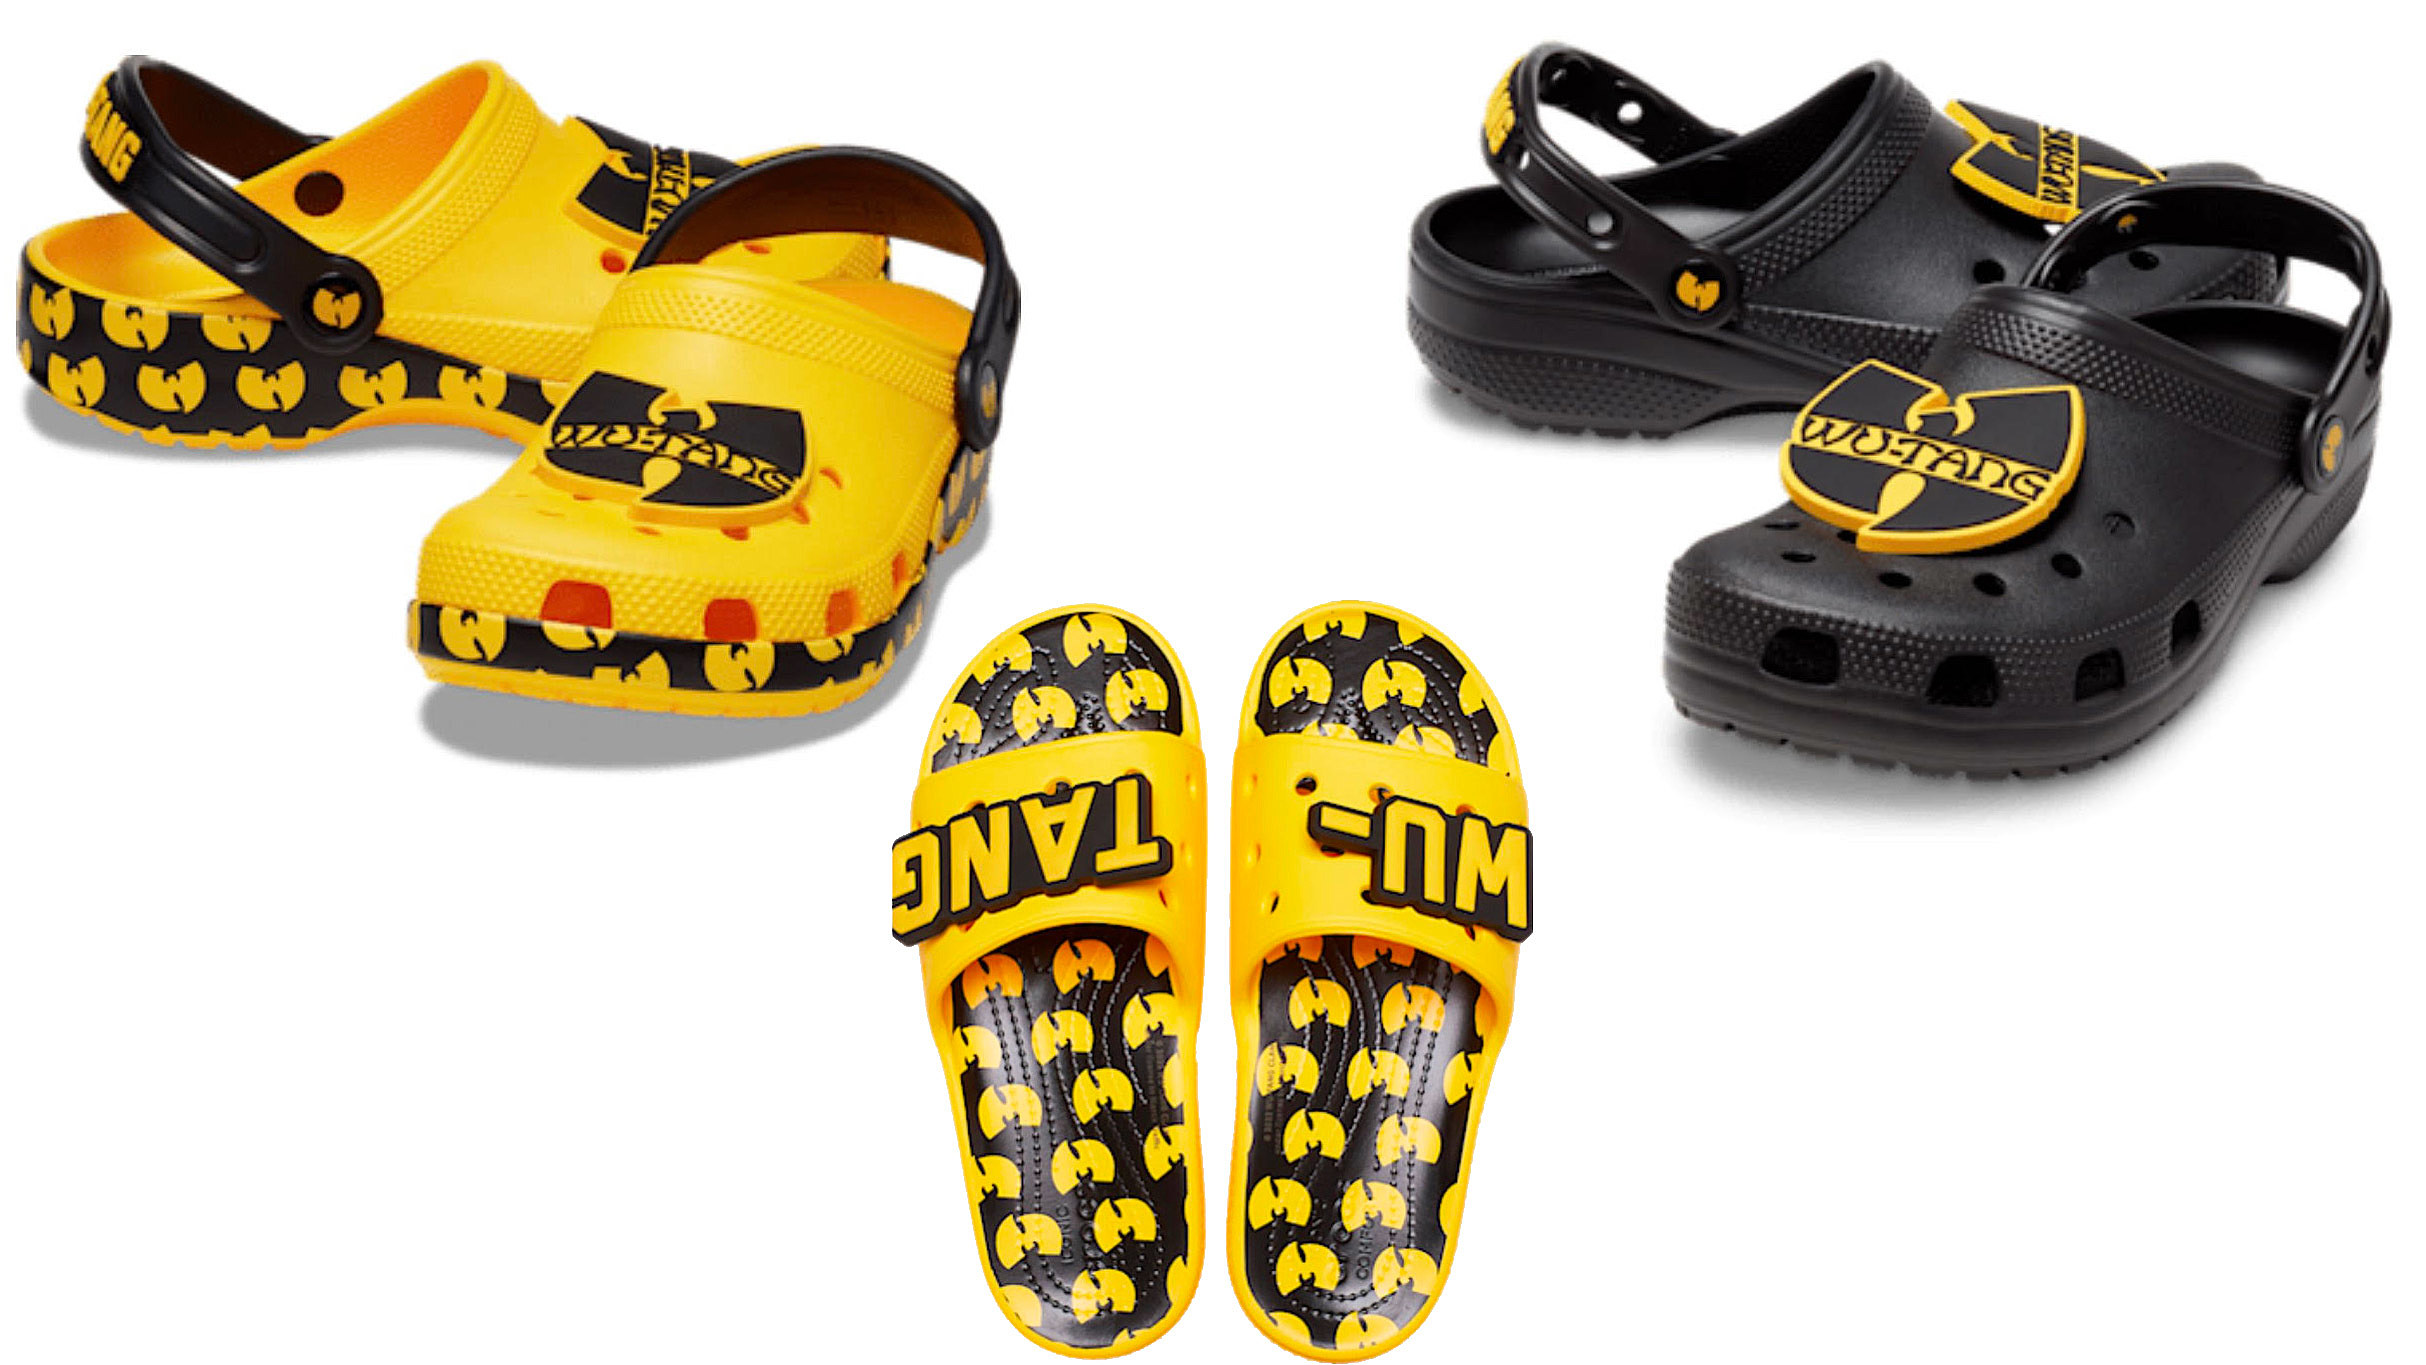 Wu Tang Clan partners with Crocs for limited edition clogs